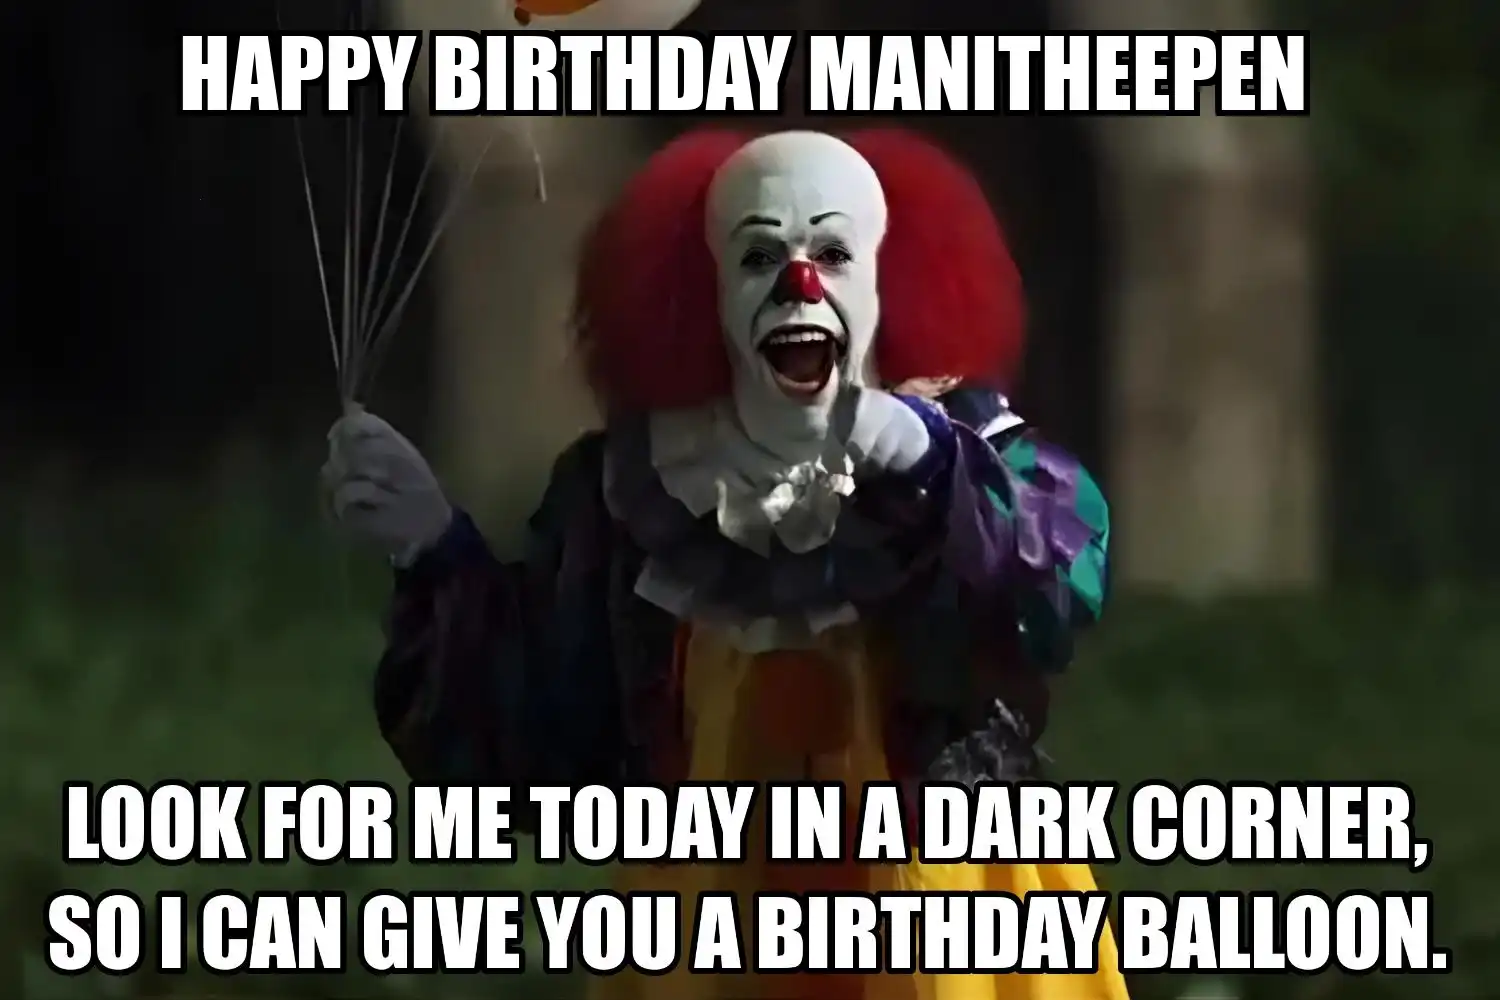 Happy Birthday Manitheepen I Can Give You A Balloon Meme